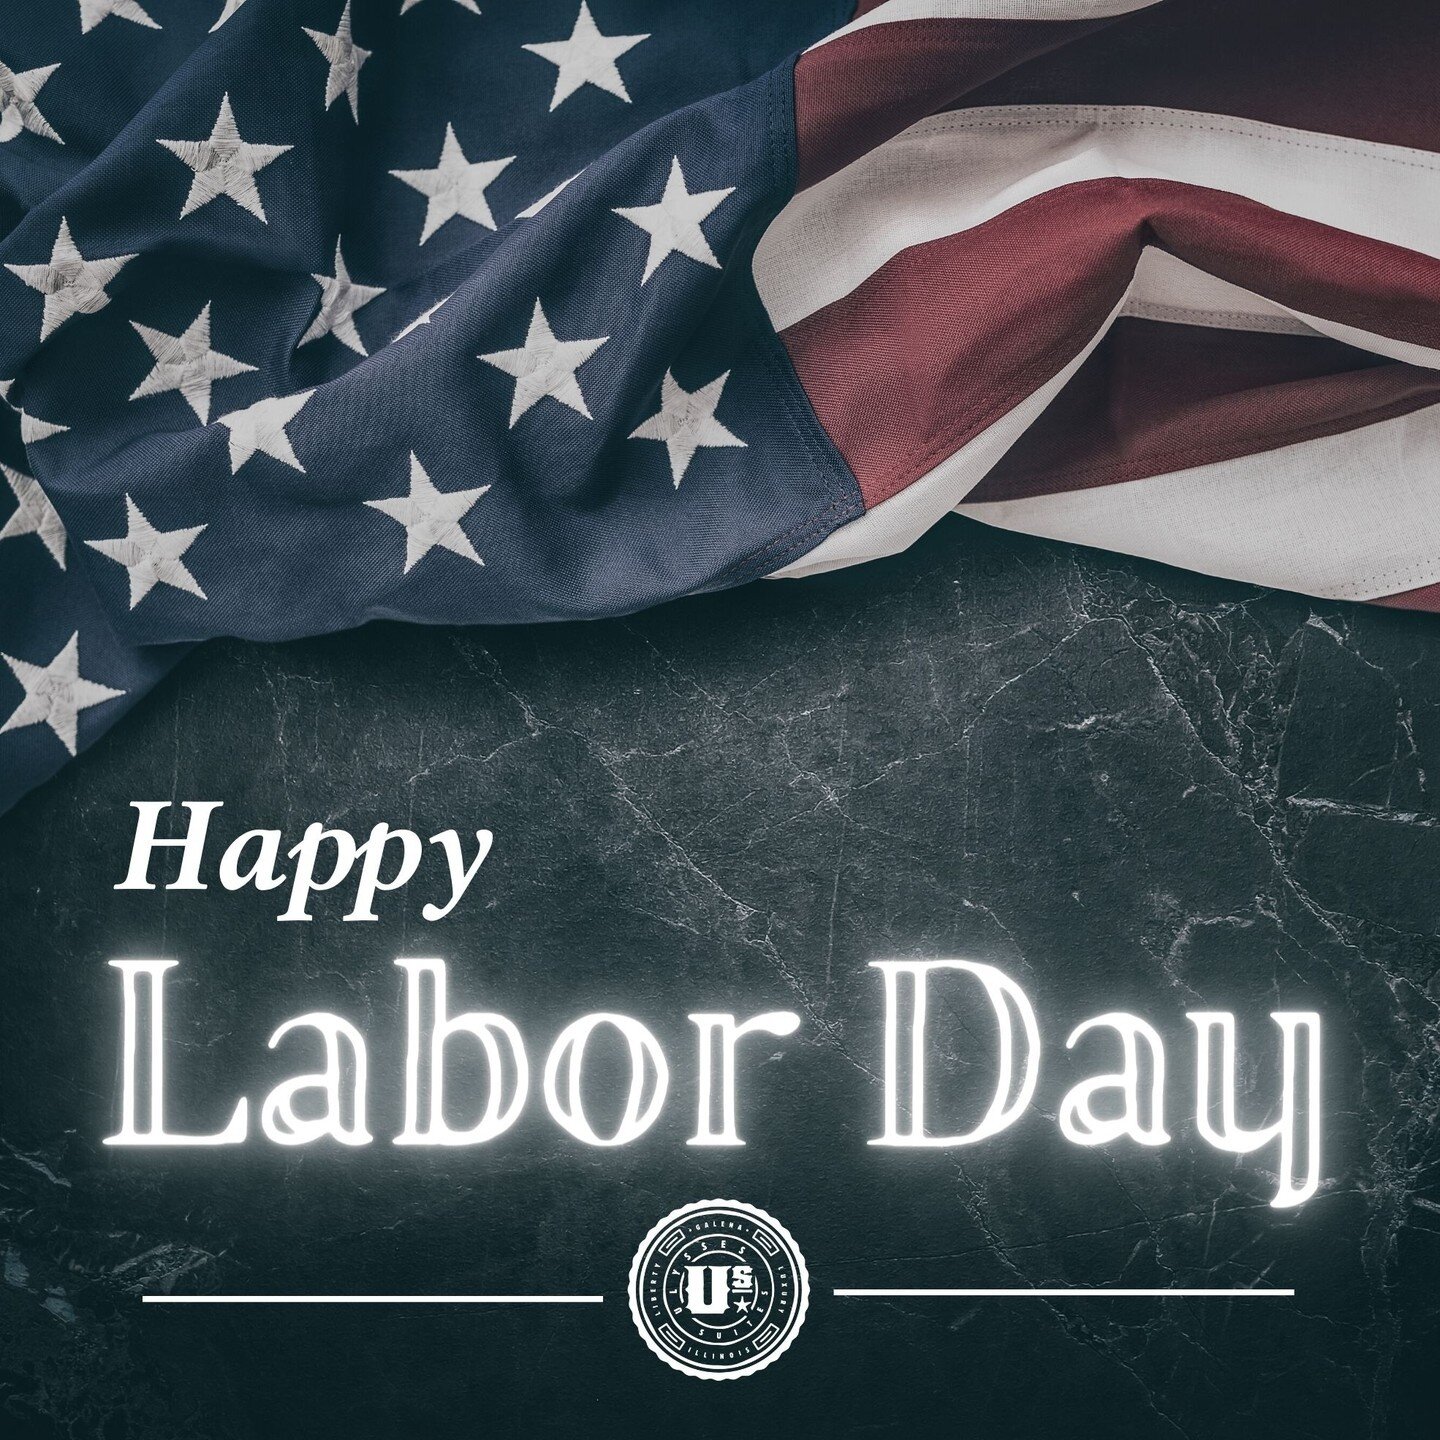 Happy Labor Day from the Ulysses Suites! 🇺🇸